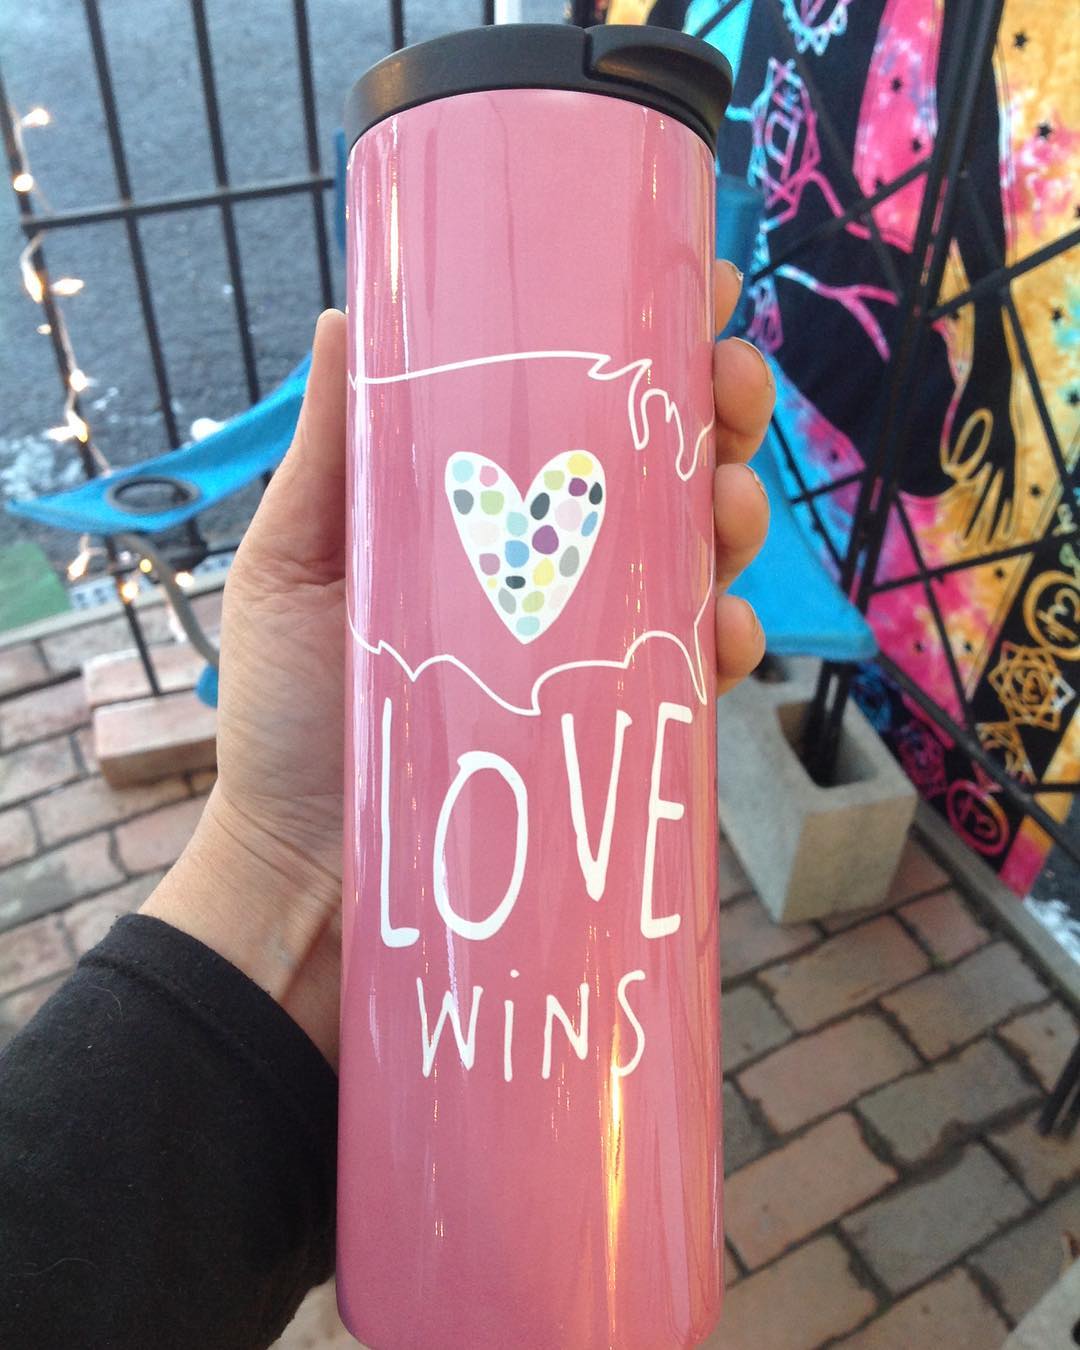 Impressive Pink Water Bottle With Love Message On It